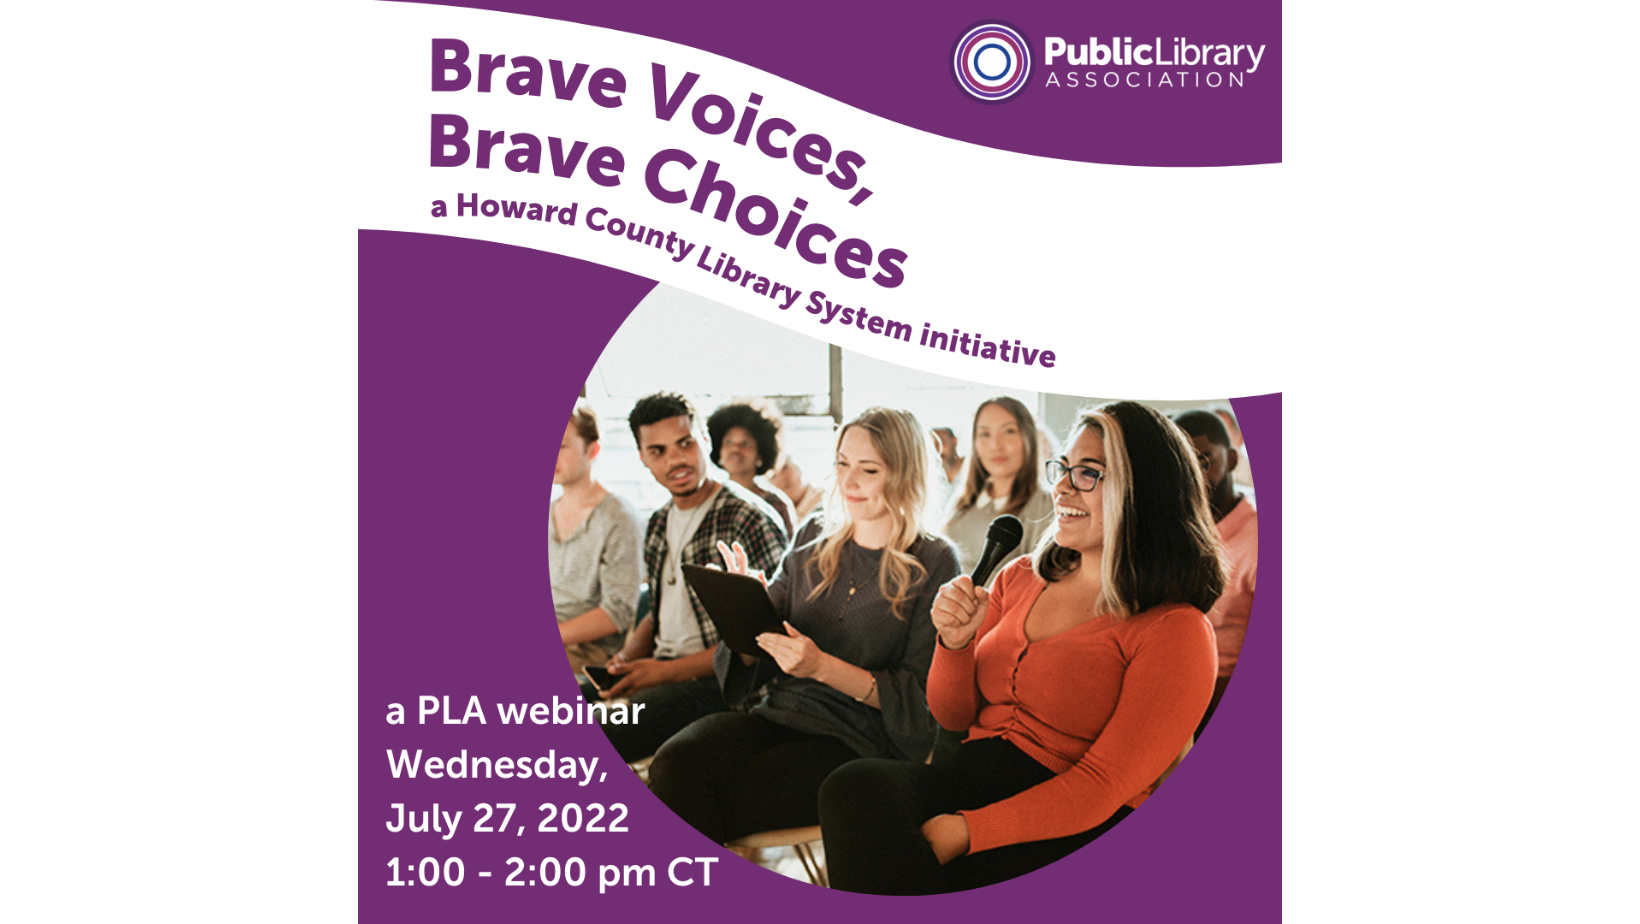 Brave Voices, Brave Choices: A look into Howard County Library